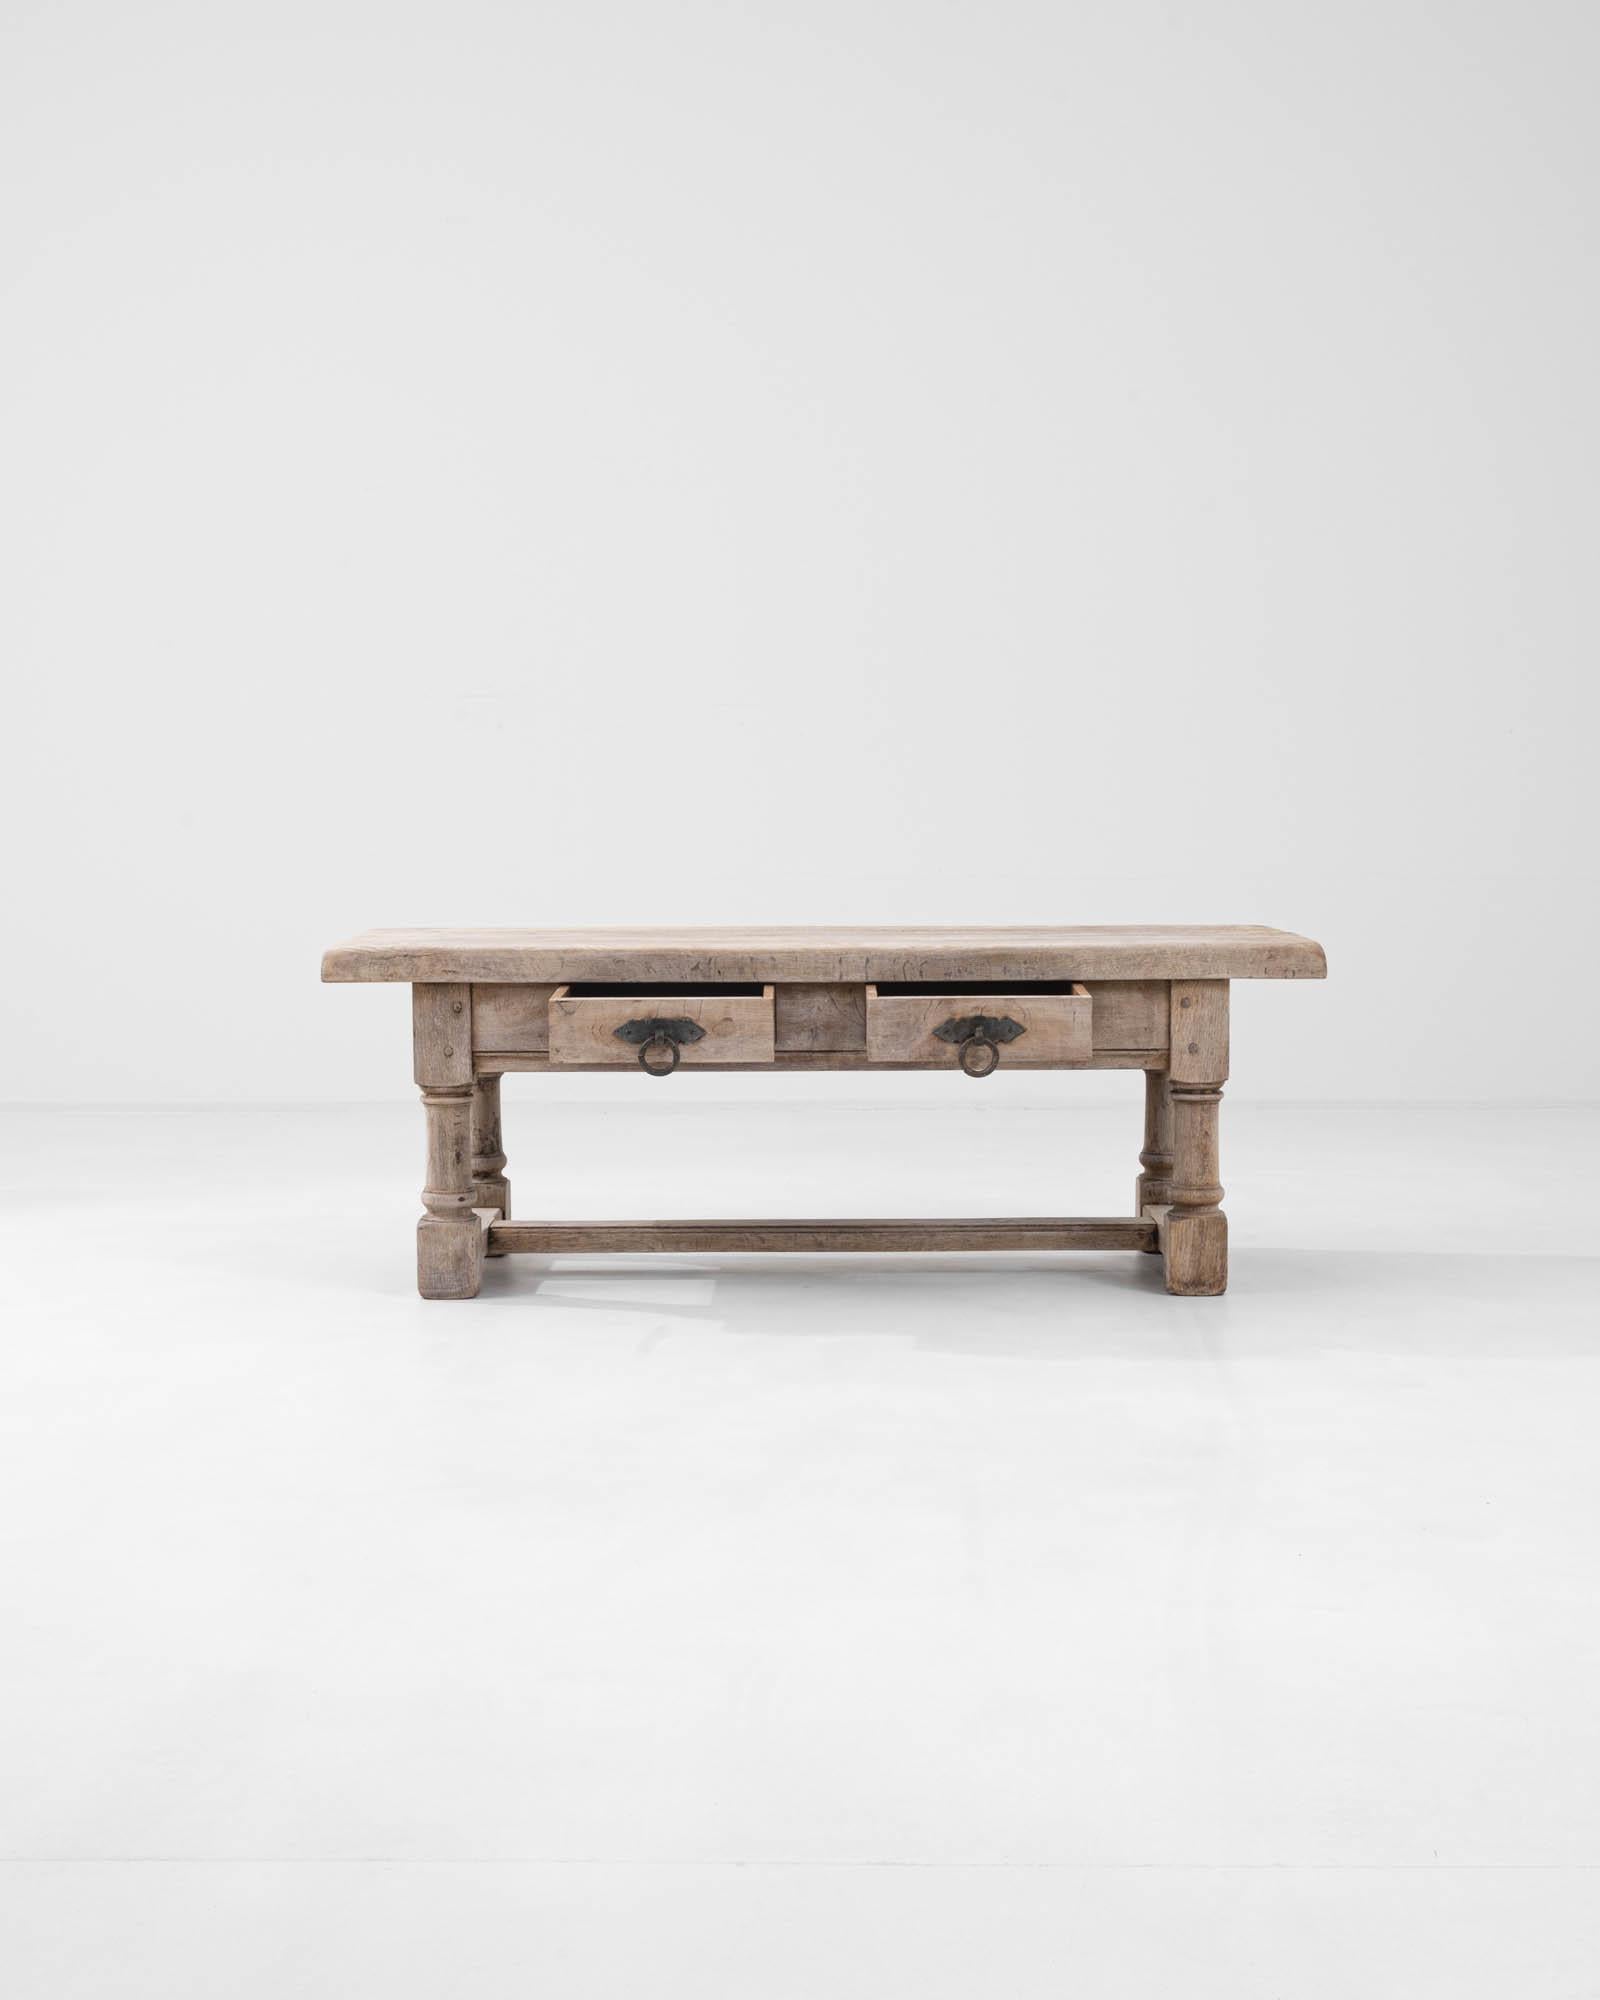 Balancing its small stature with solid proportions, this vintage coffee table in natural oak makes an attractive provincial centerpiece. Hand-built in France in the 20th century, the form imitates the sturdy silhouettes of grand country dining